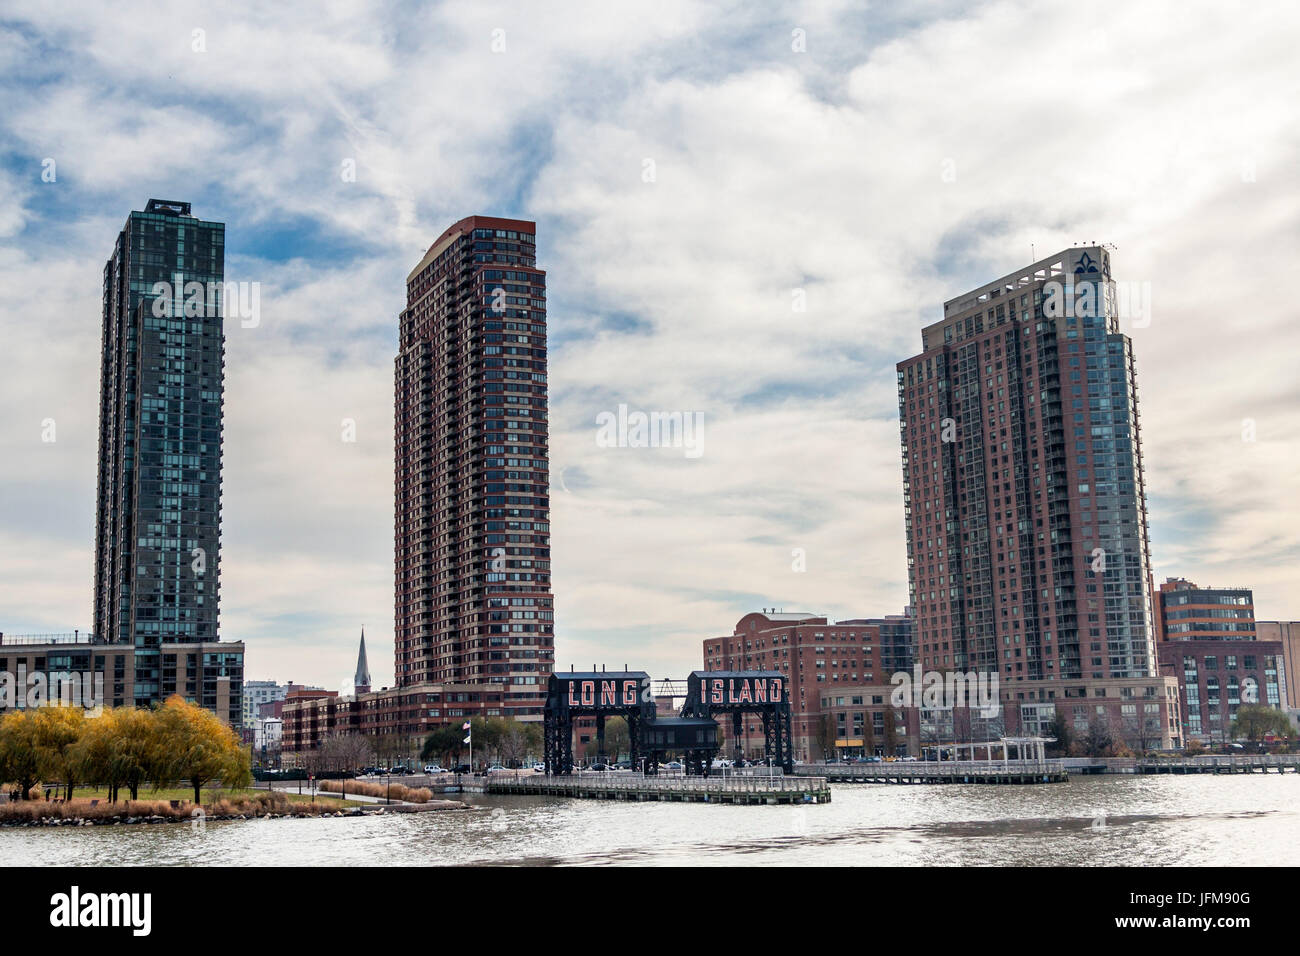 USA, New York, Long Island, Queens, Long Island City on East River Stock Photo